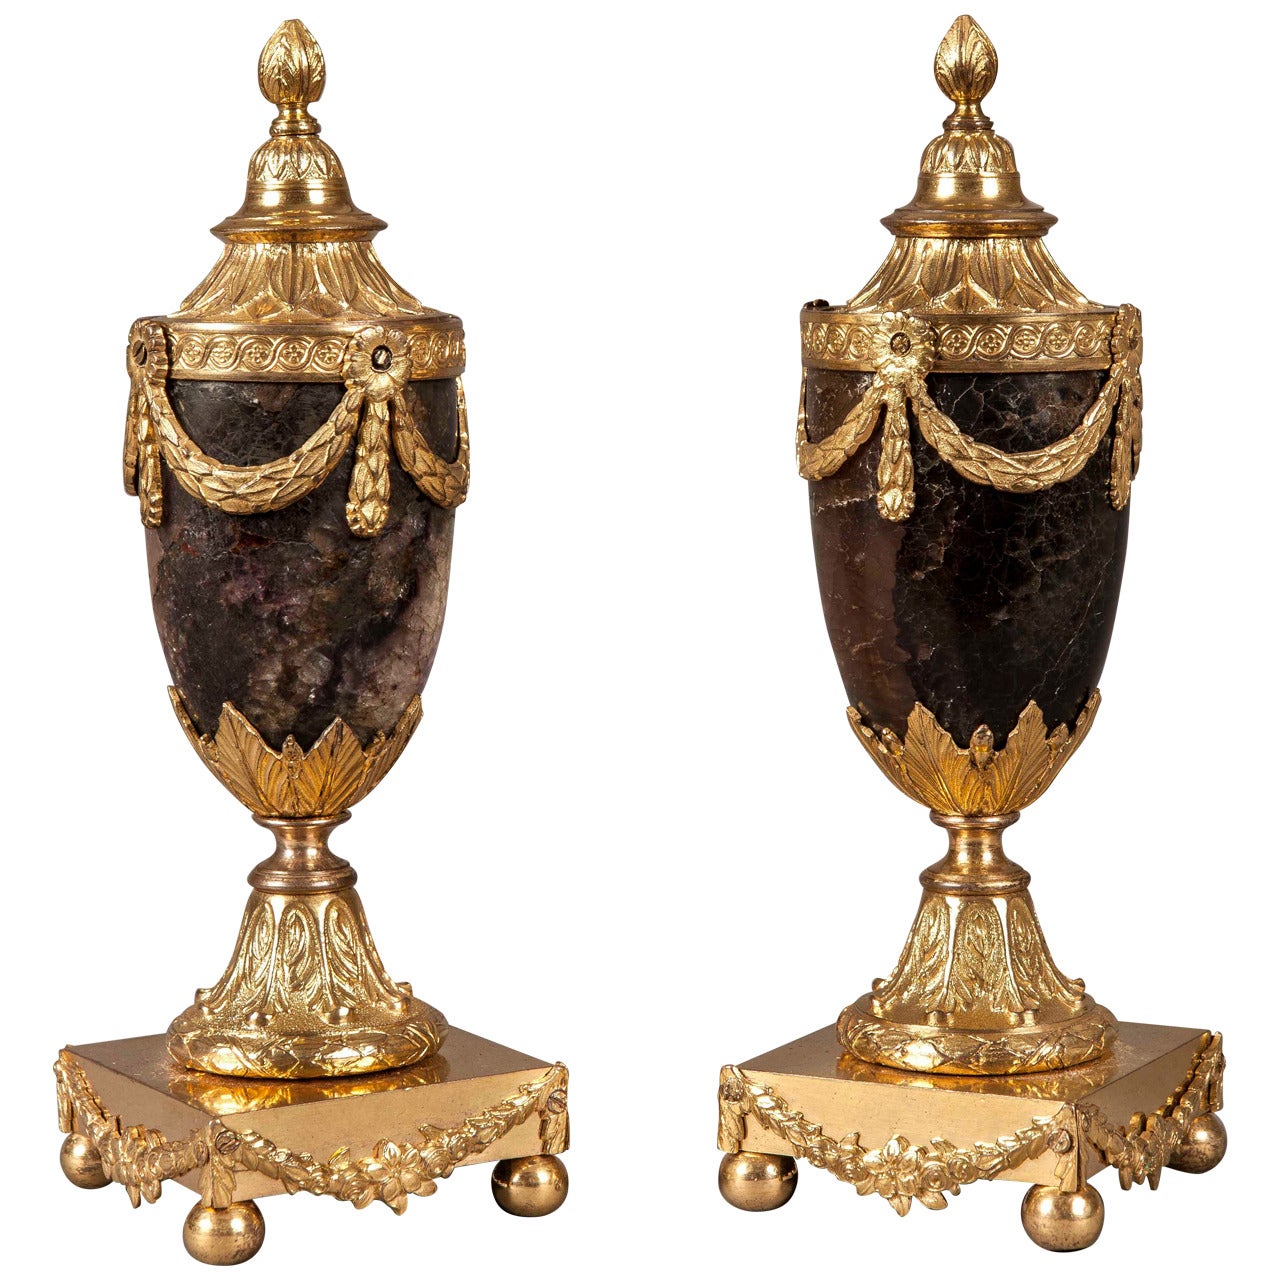 Pair of 18th Century English Gilt and Blue-John Stone Vases and Candleholders